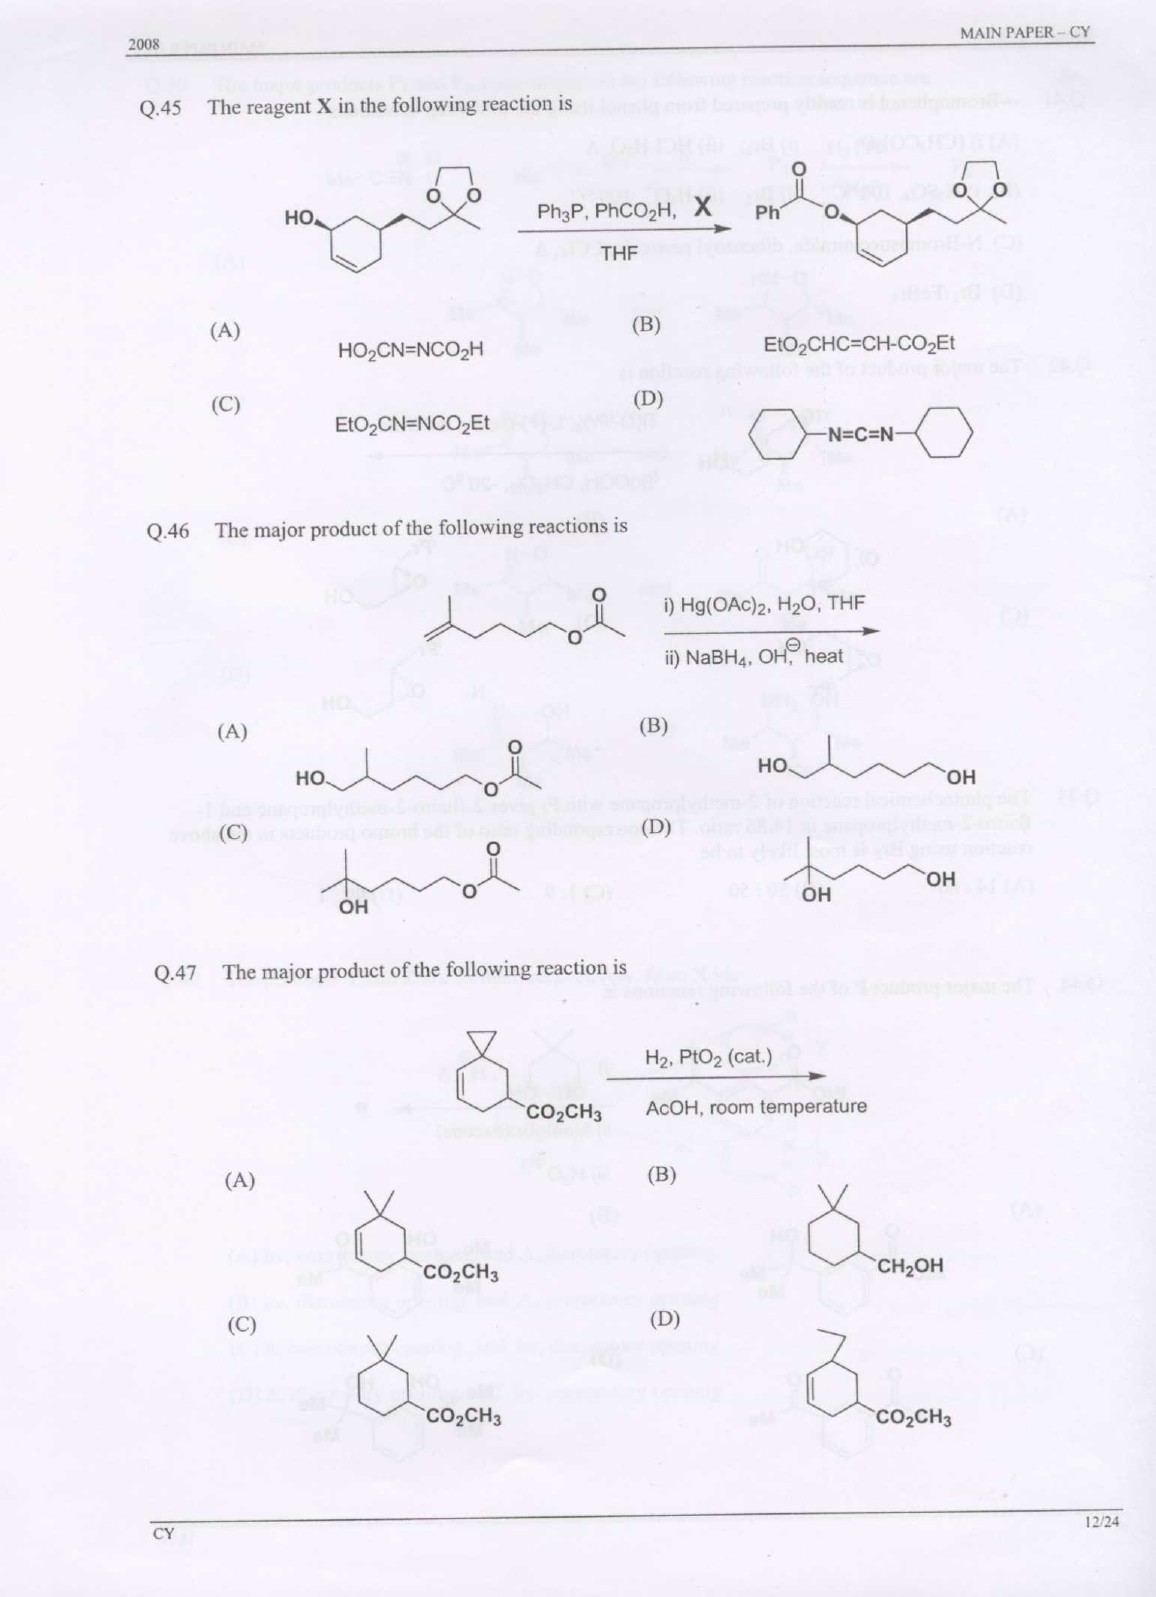 GATE Exam Question Paper 2008 Chemistry 12